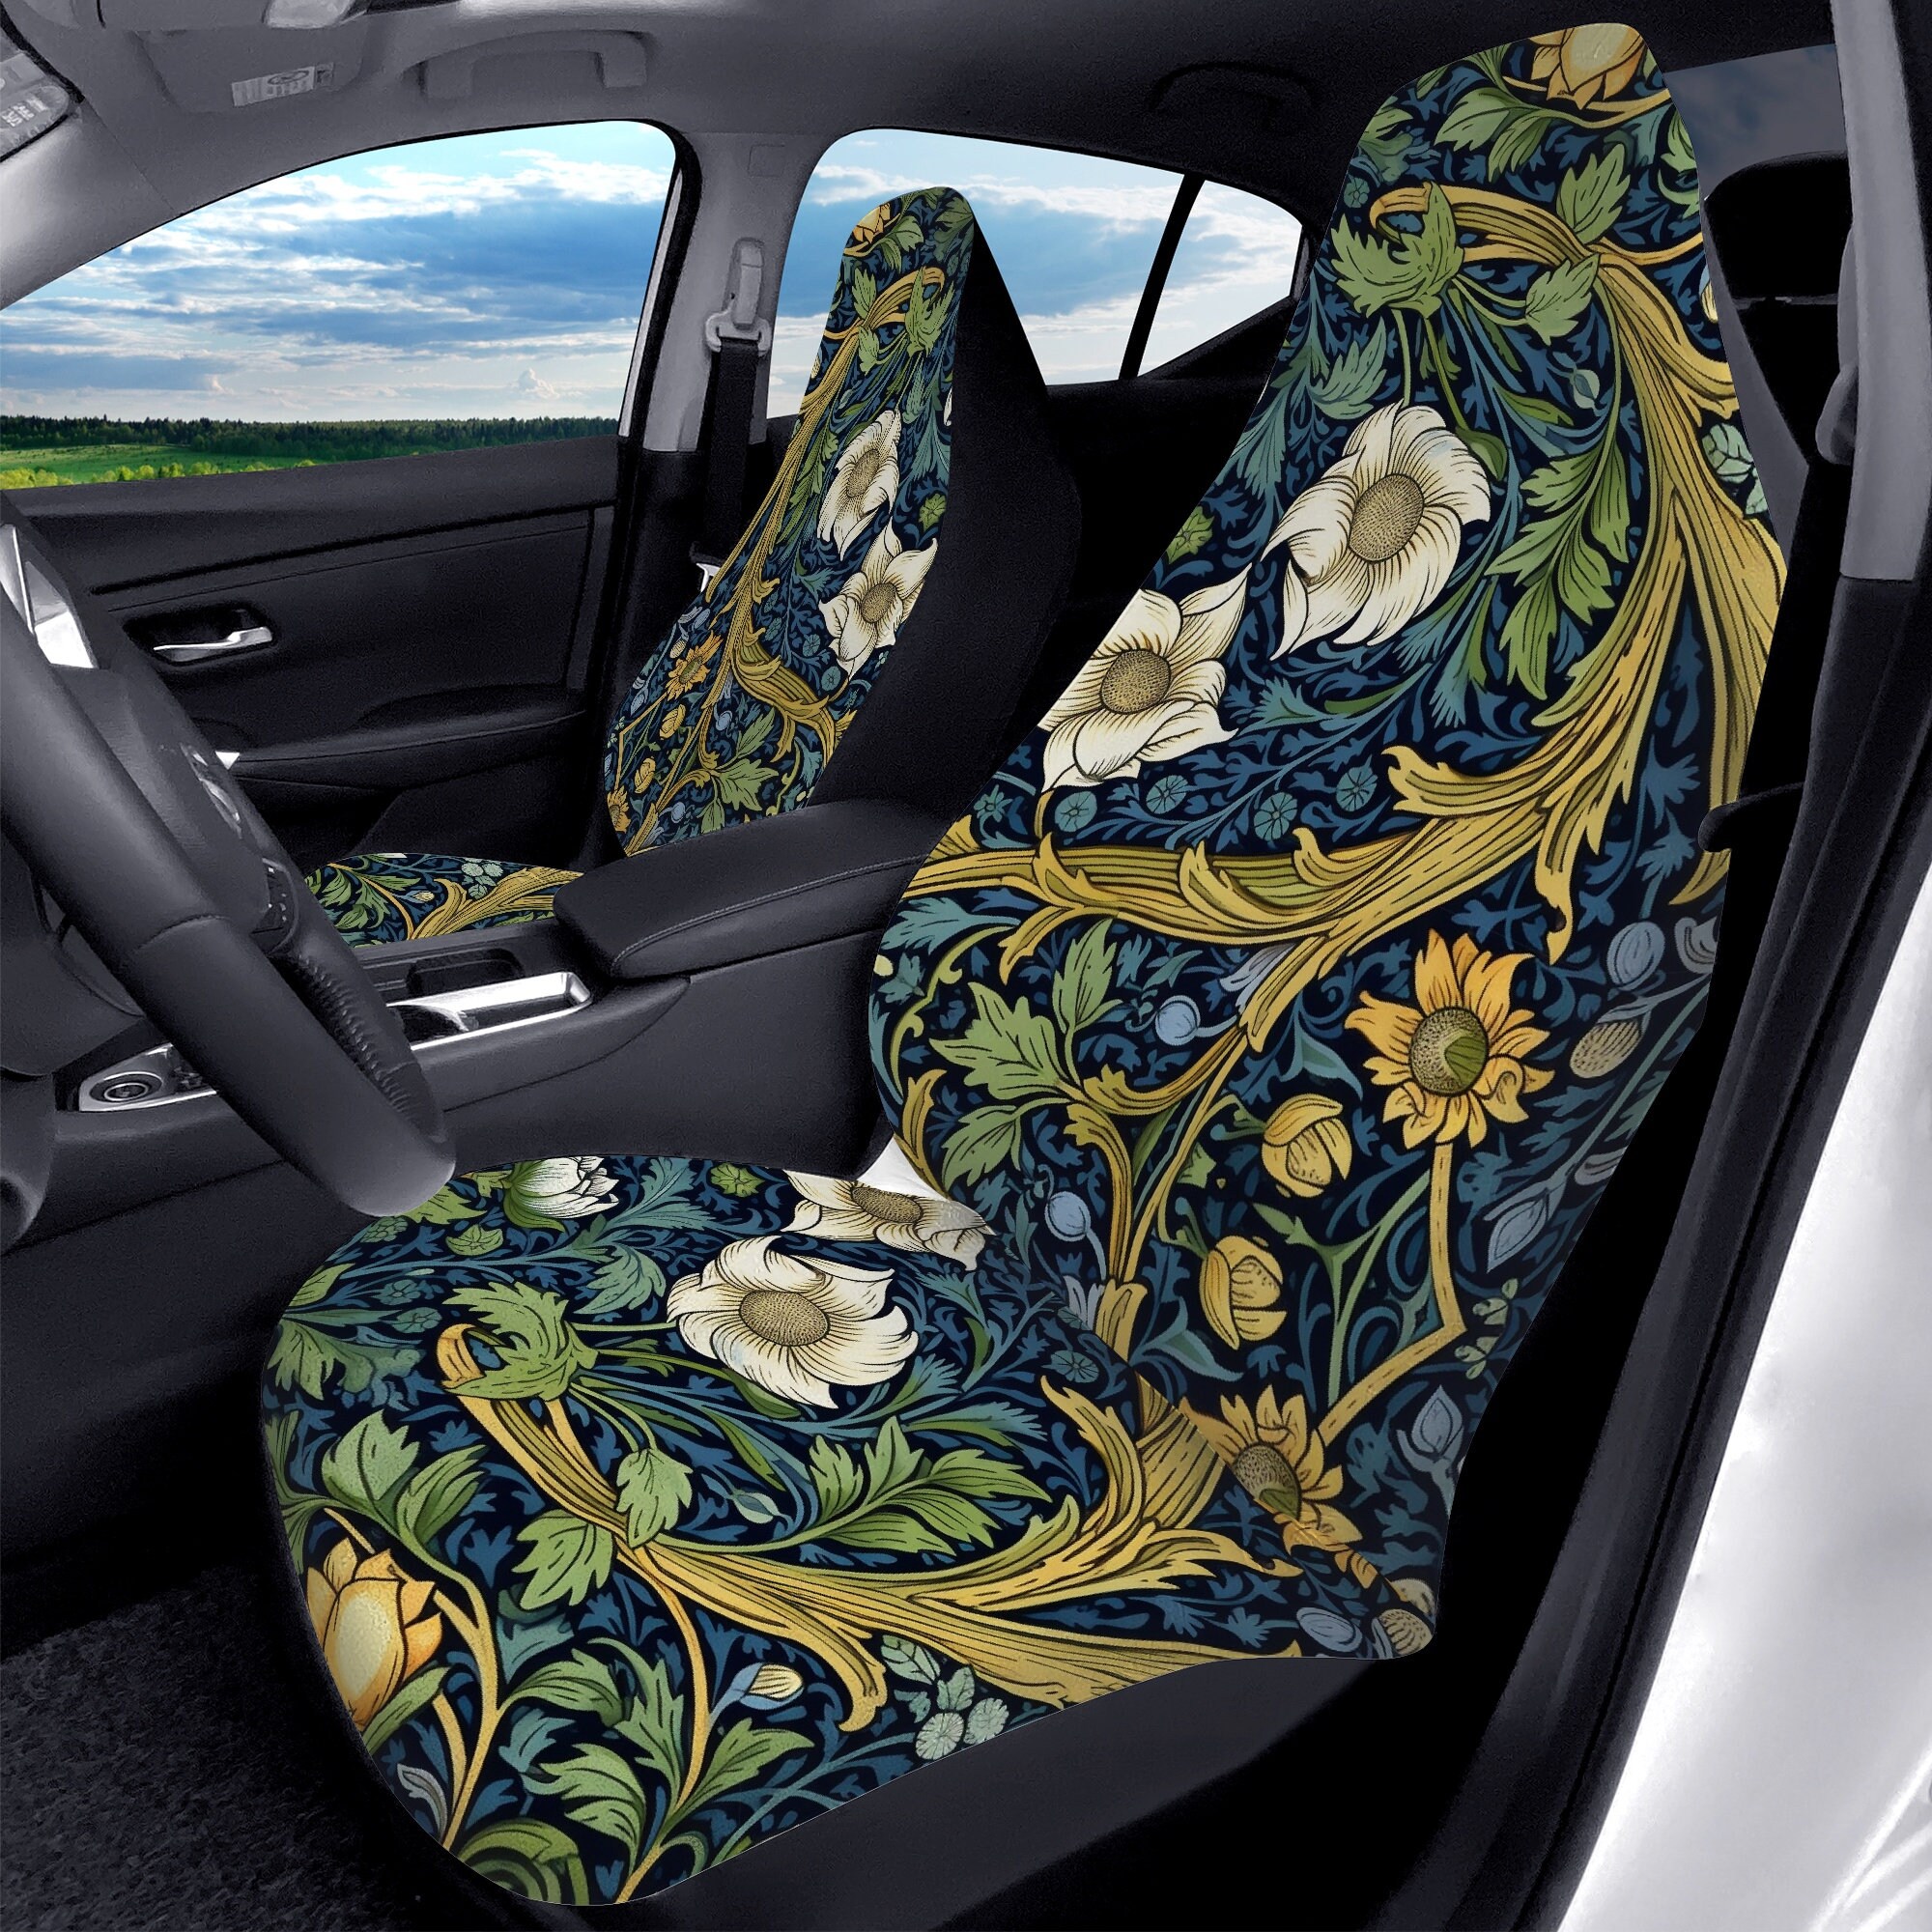 Discover Cottagecore Botanical Wildflower Car Seat Covers, Witchy Boho Floral Seat Protectors and Vehicle Decor, Cottagecore Car Interior Decor